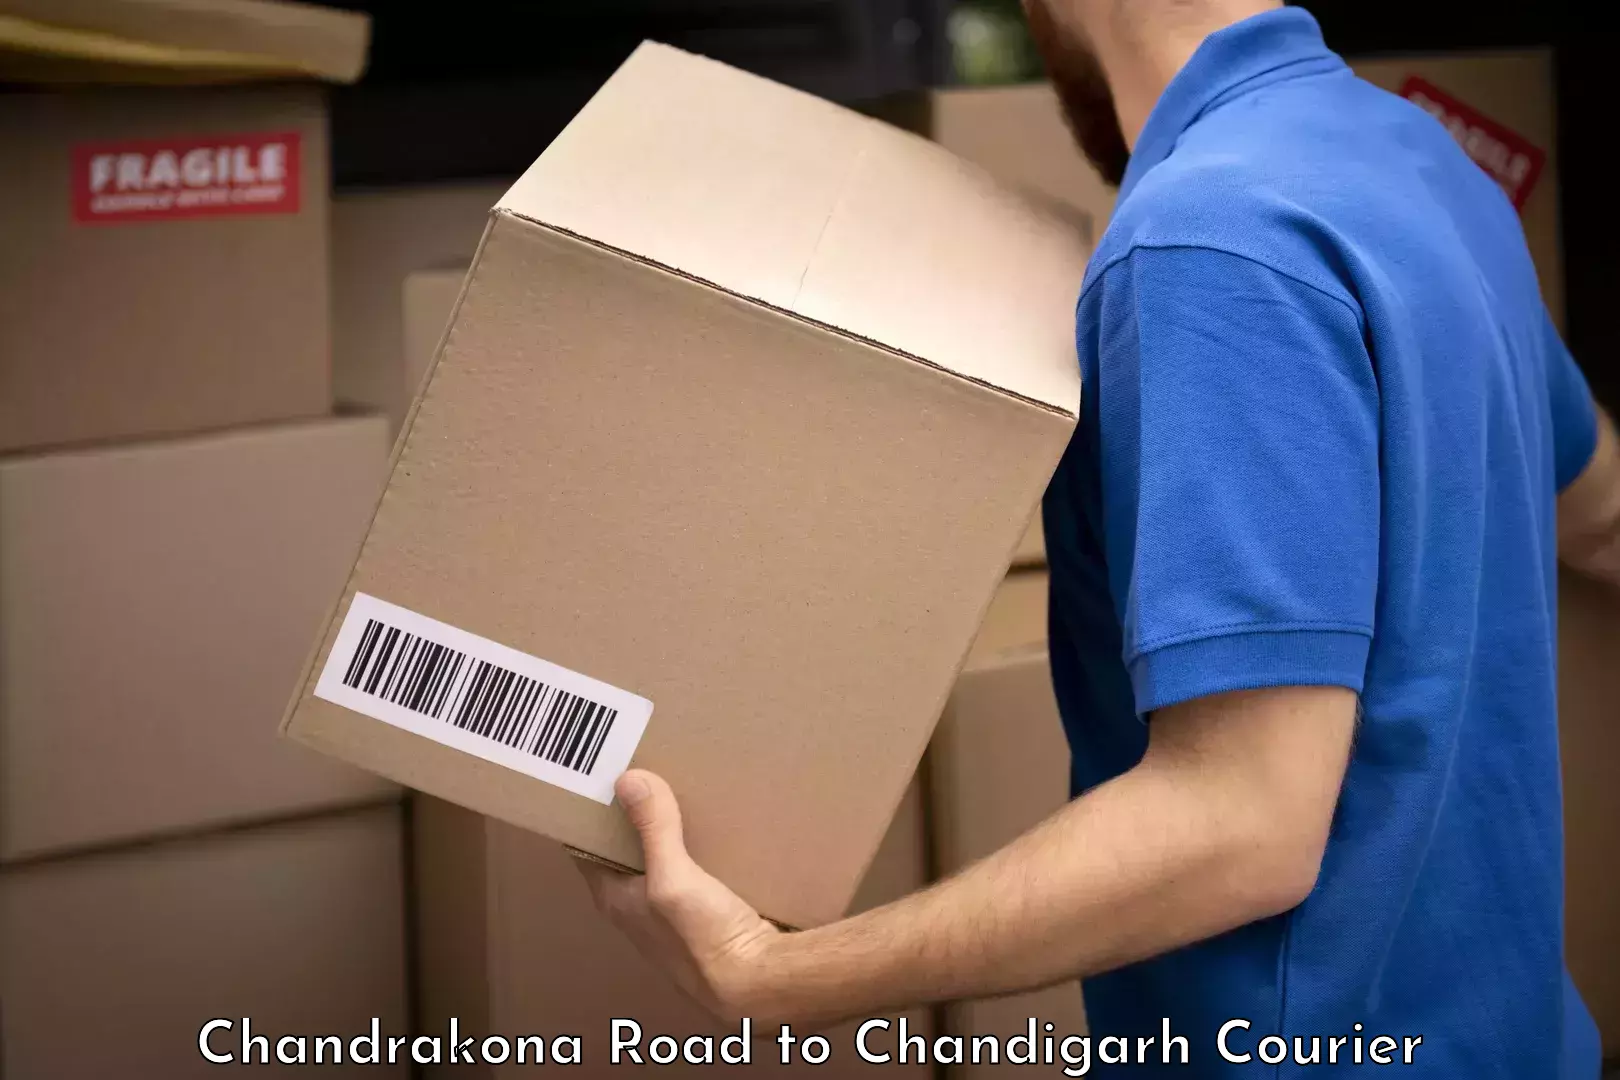 Nationwide luggage courier Chandrakona Road to Chandigarh